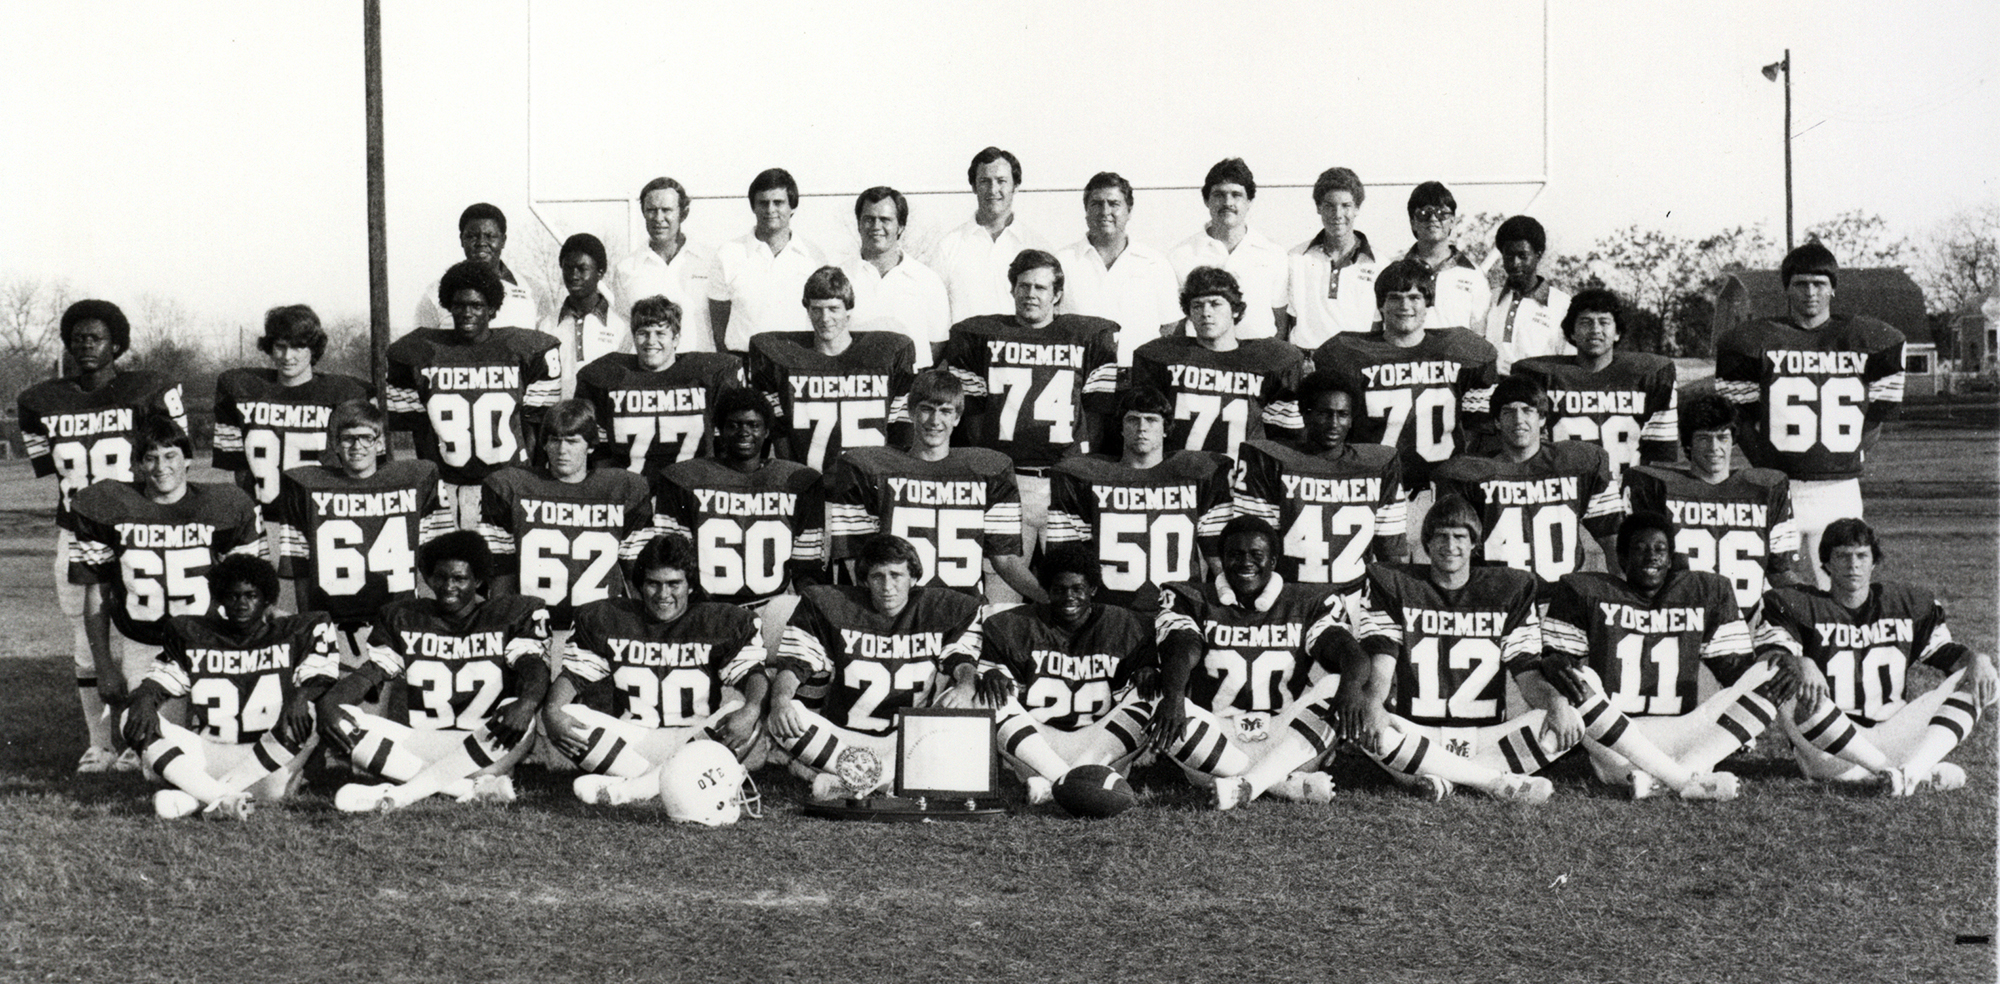 The State Championship Football team at Cameron Yoe High School in 1981. Dr. Pool is #23 on the front row.